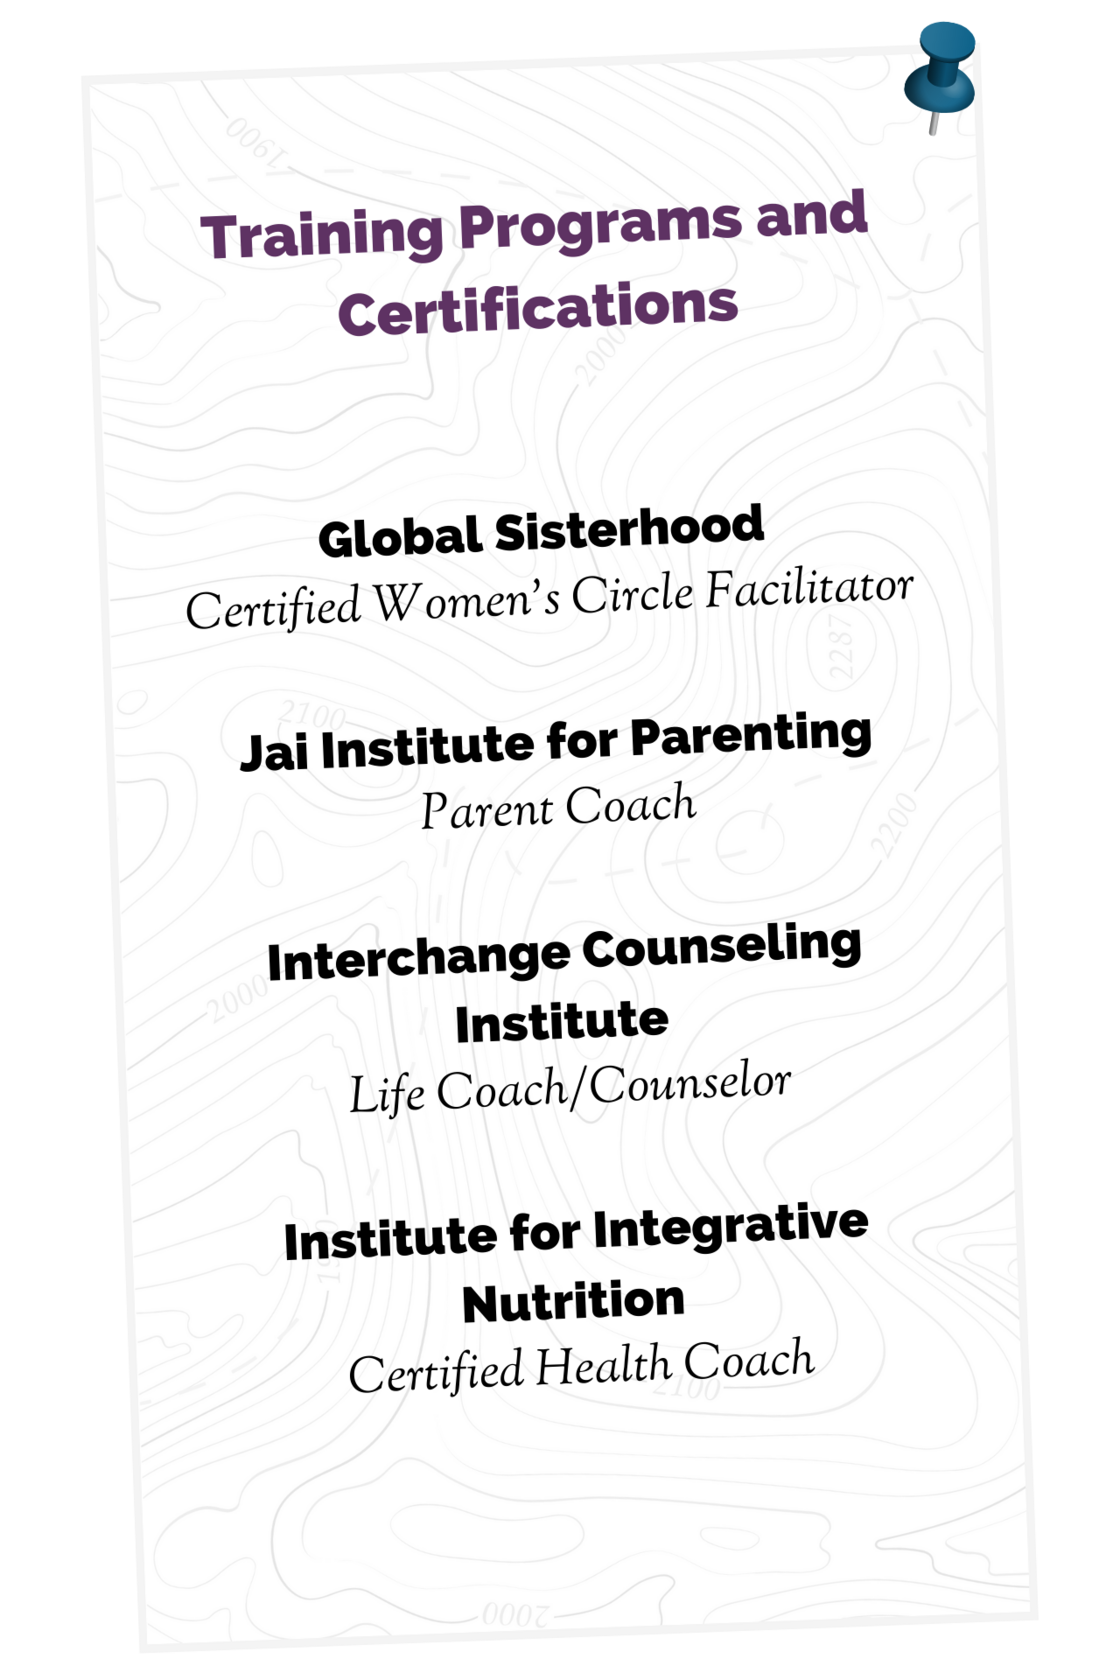 Training and Certifications